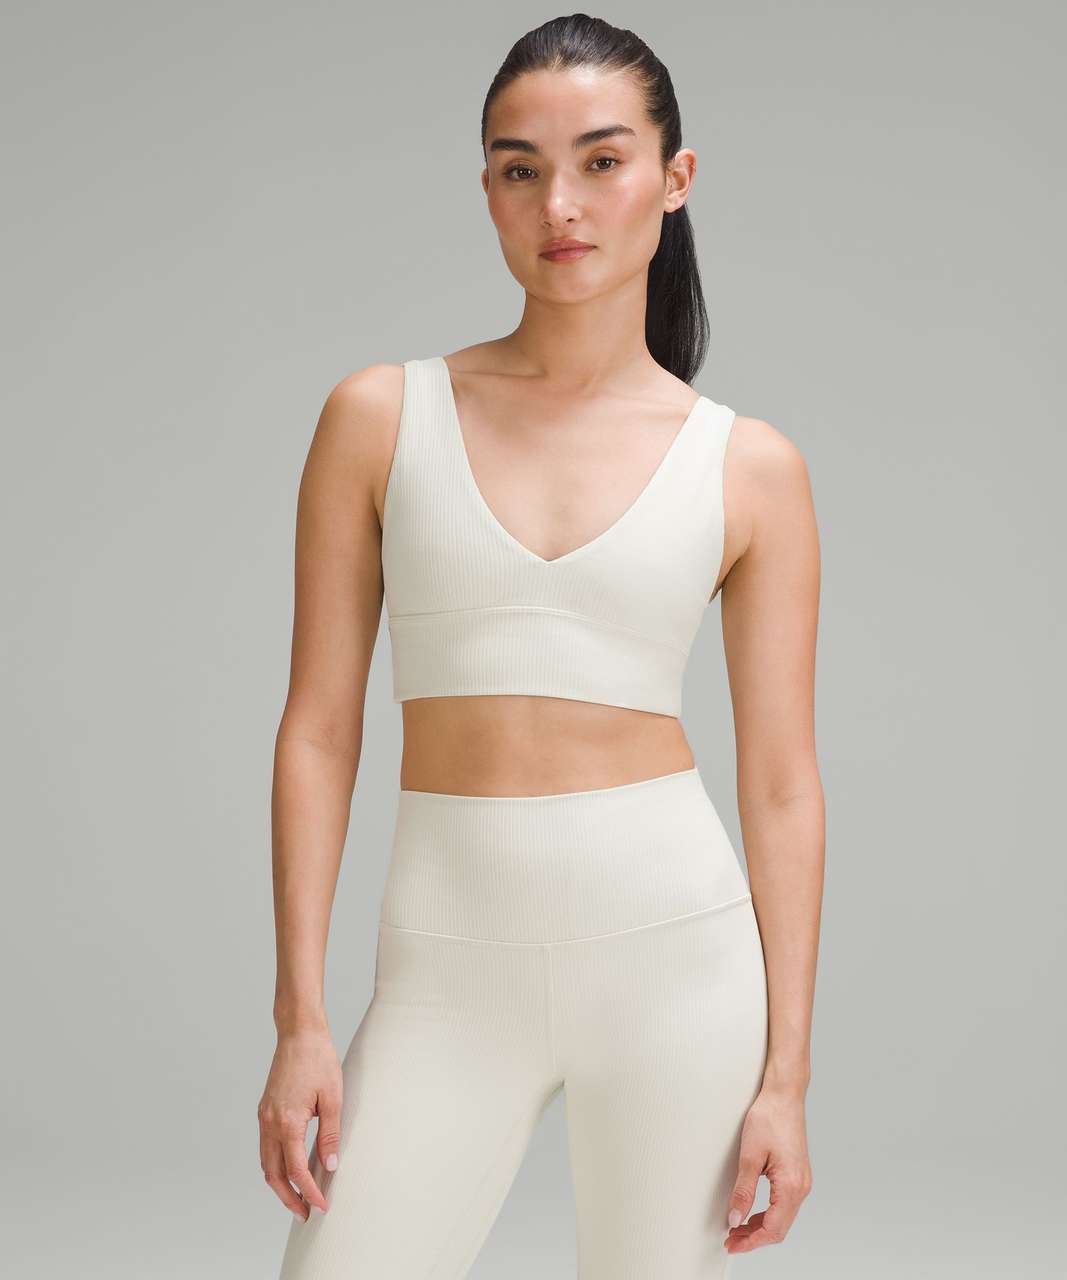 Lululemon Align Ribbed Bra A/B Cup, Light Support – The Shop at